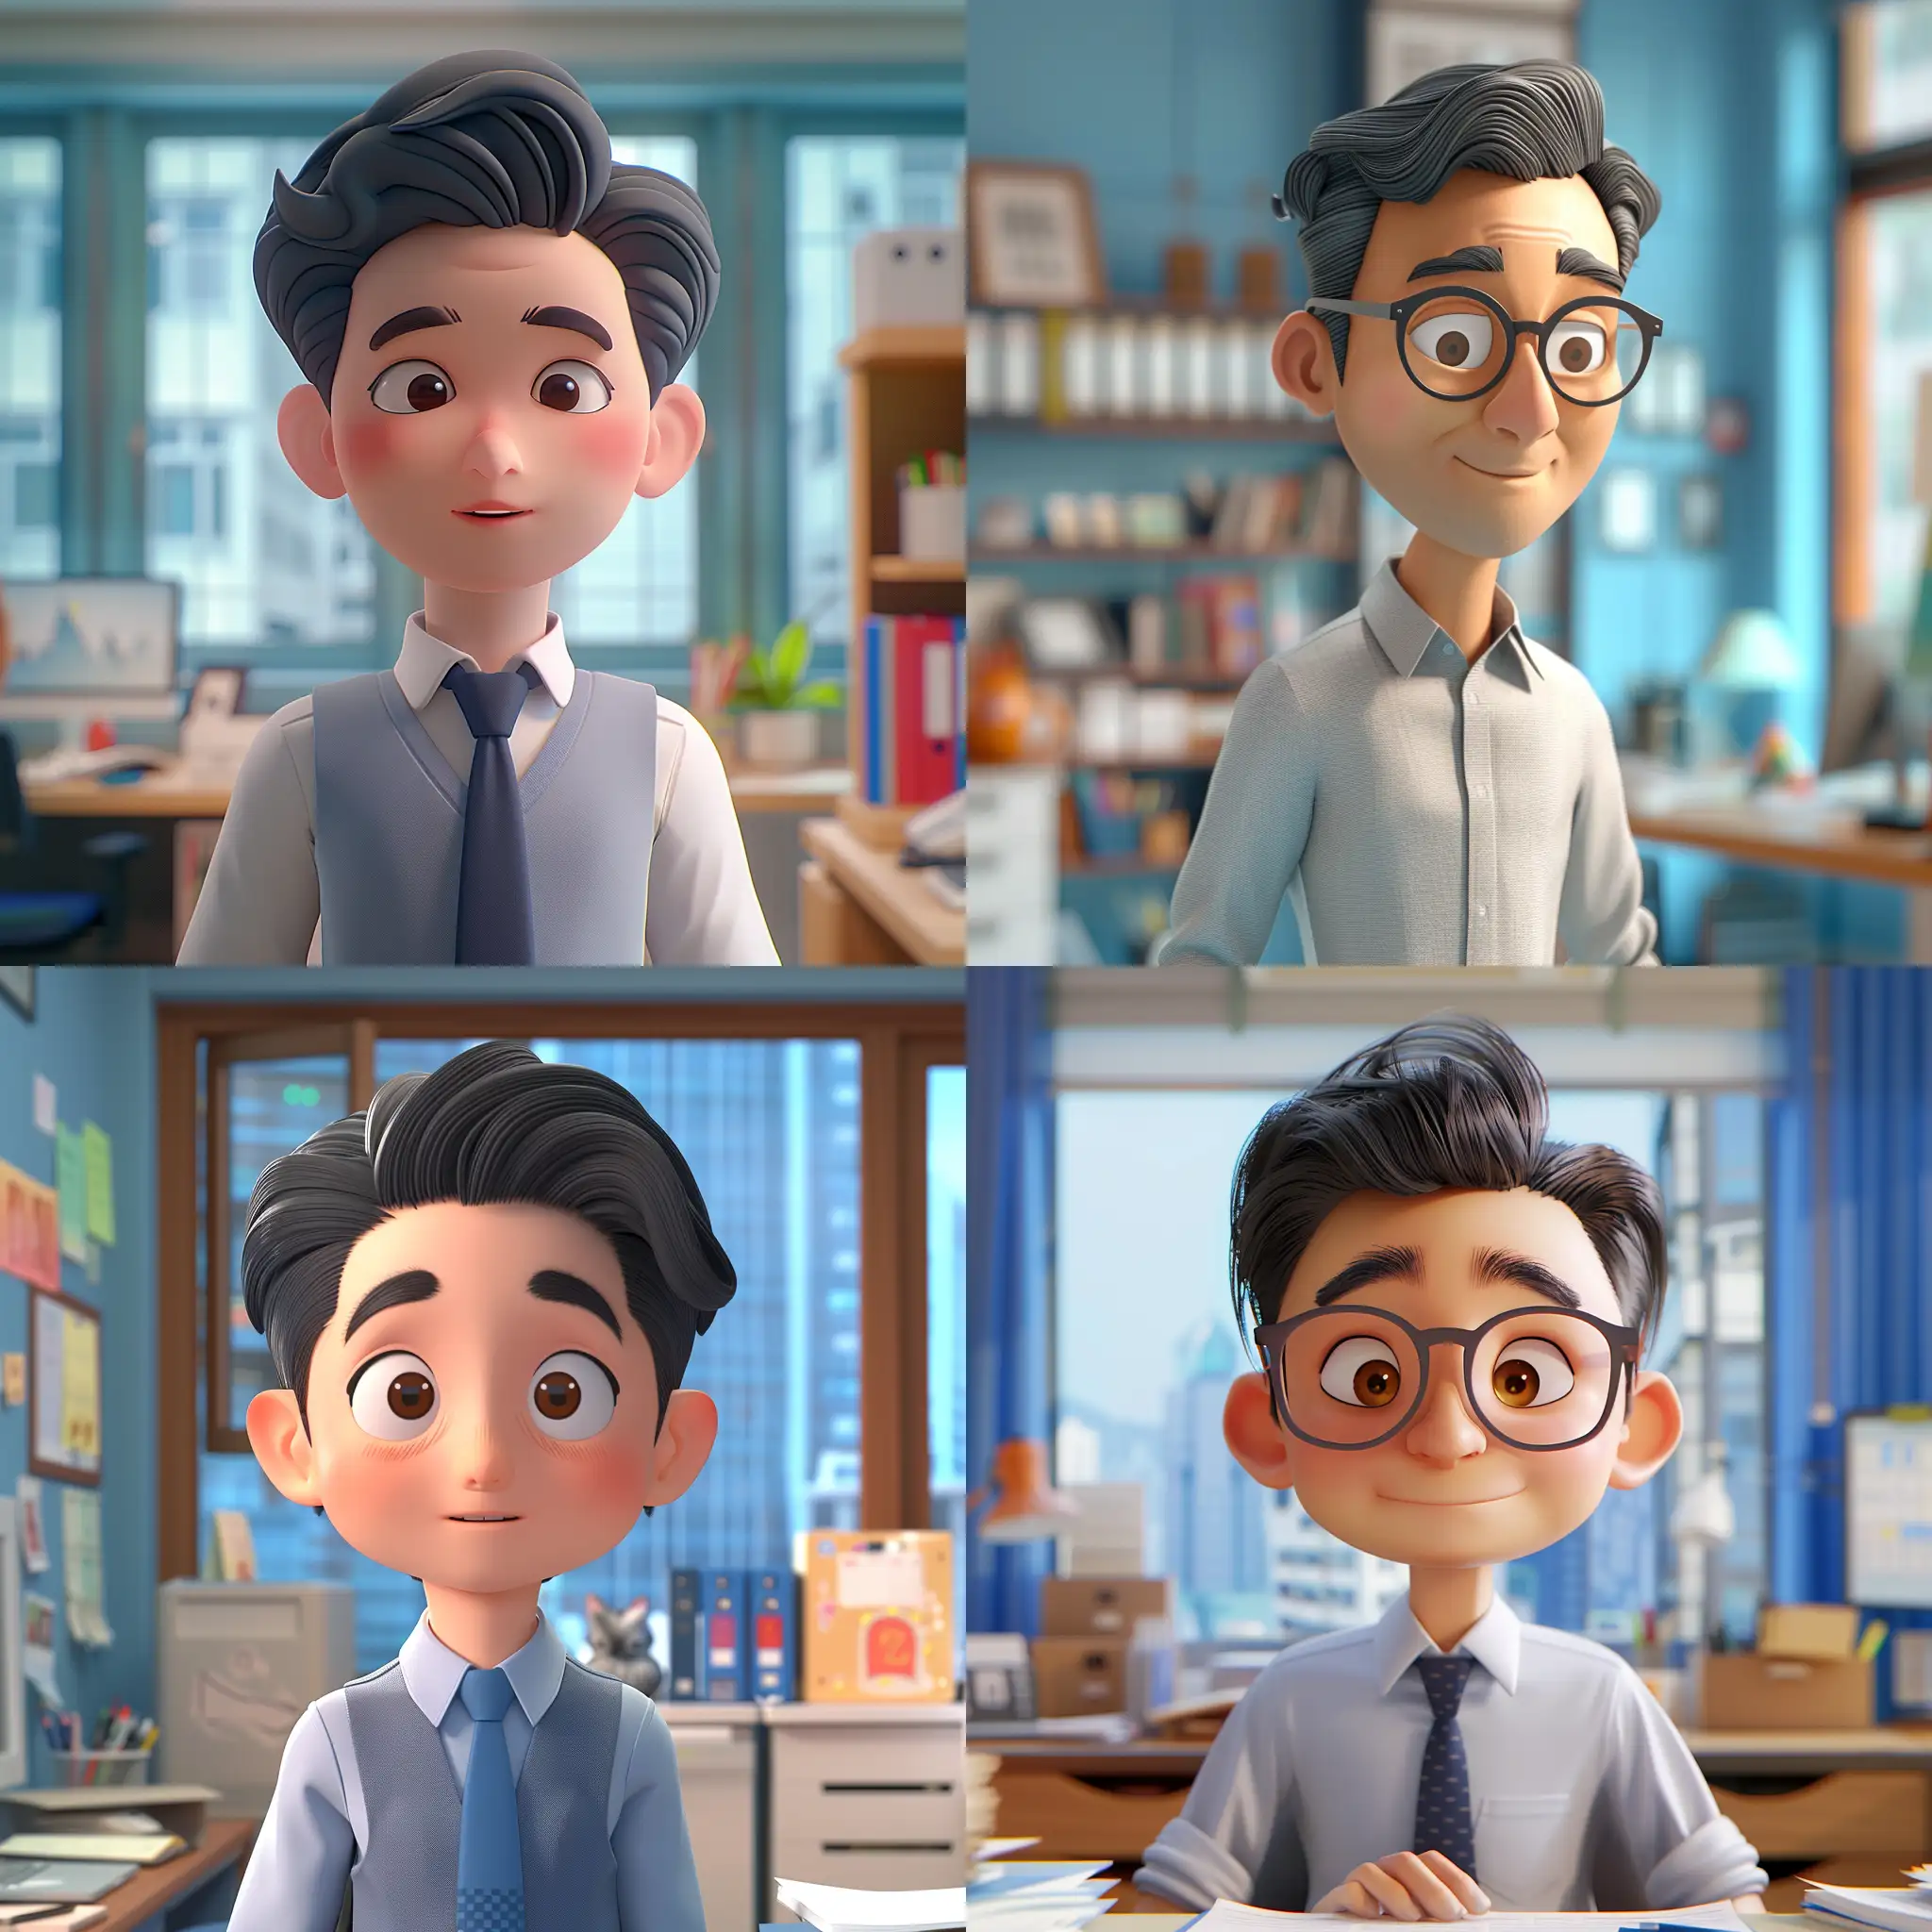 Create a 3D animated character of a pro-copywriter in an office setting, with warm cartoon-like features and human-like proportions, wearing contemporary professional attire. The character should have a friendly and thoughtful expression, working in a cozy office in Hong Kong. The overall color palette should include shades of blue close to #2563eb for a harmonious and inviting atmosphere.
